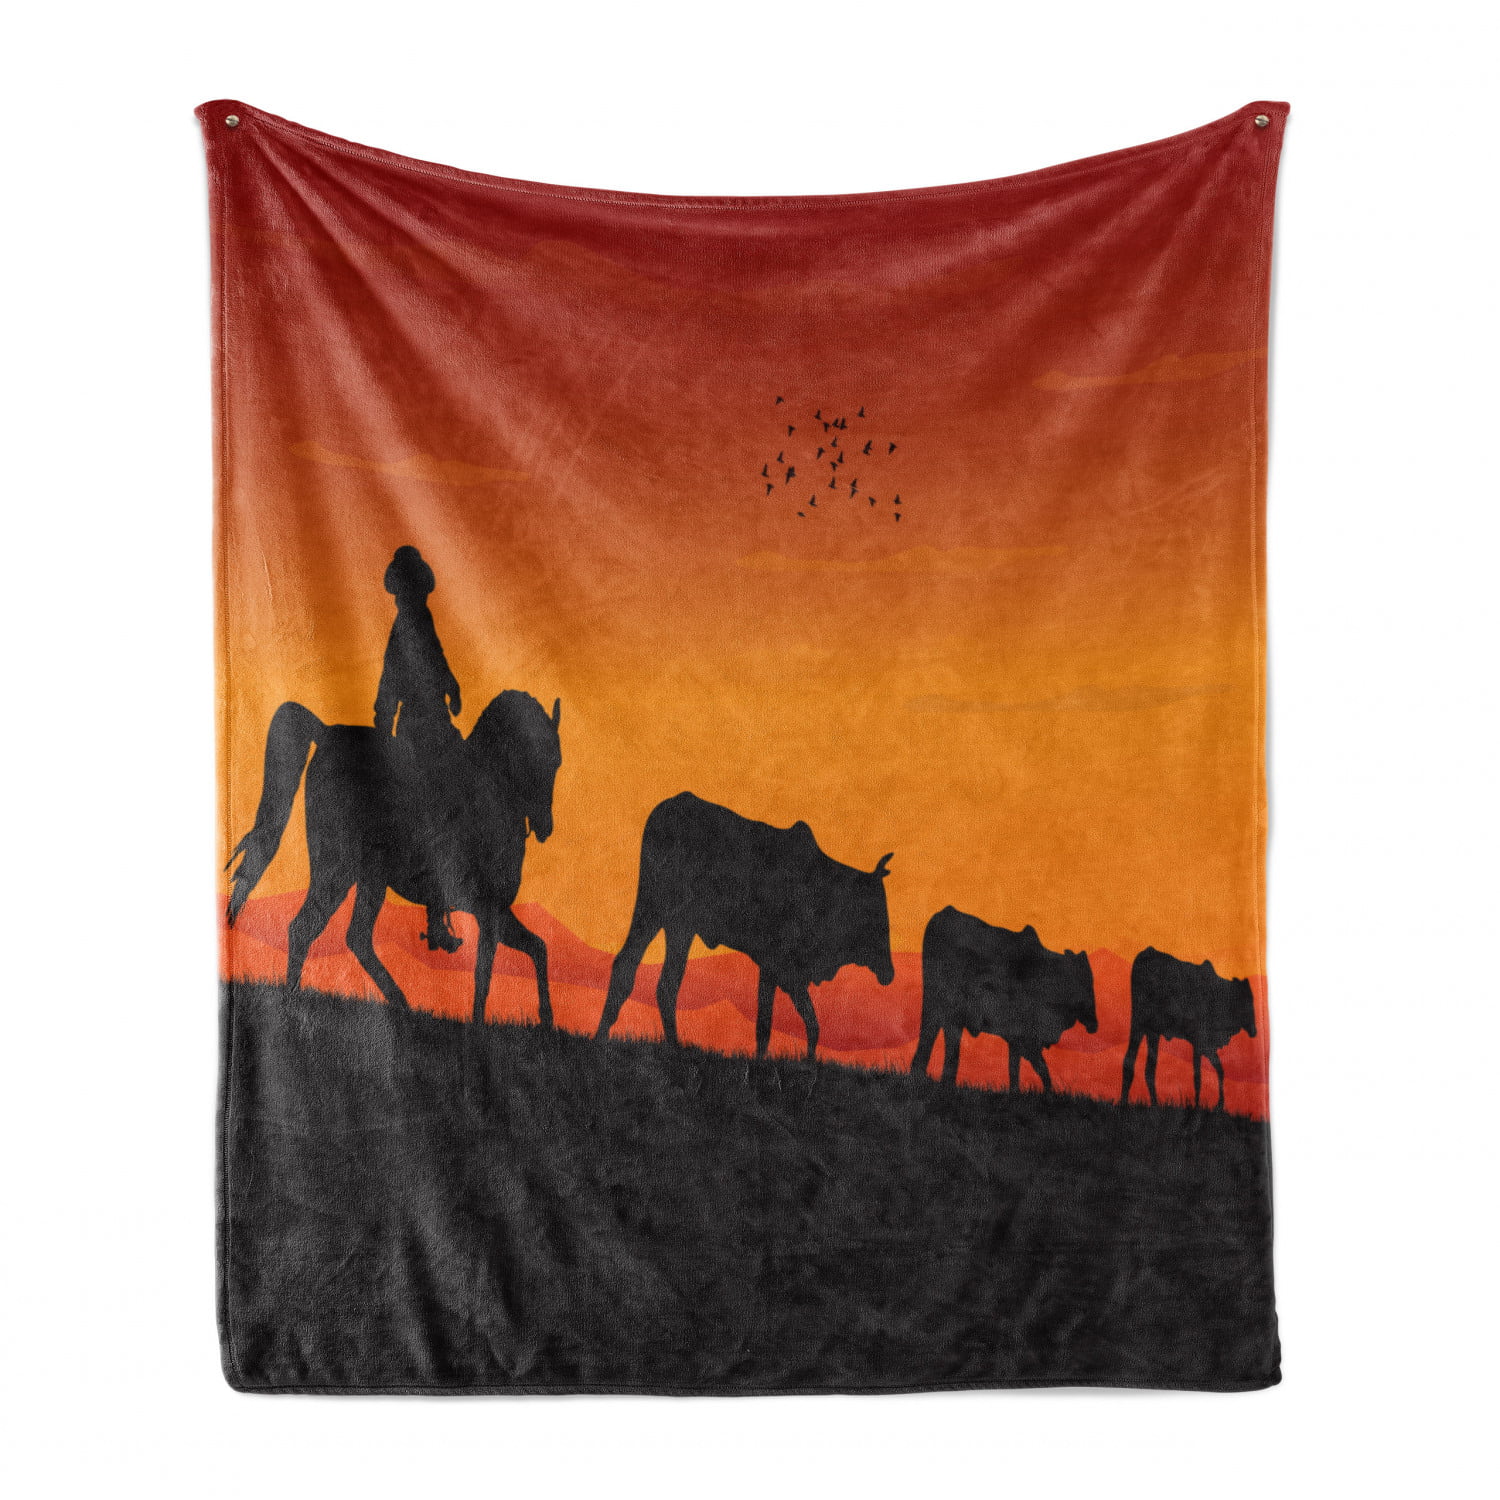 Throw Blanket Farm Animals Horse Cow Fleece Blanket Cozy Lightweight Bed Blanket Women Men 60x50 Plush Home Decoration for Winter and All Seasons 